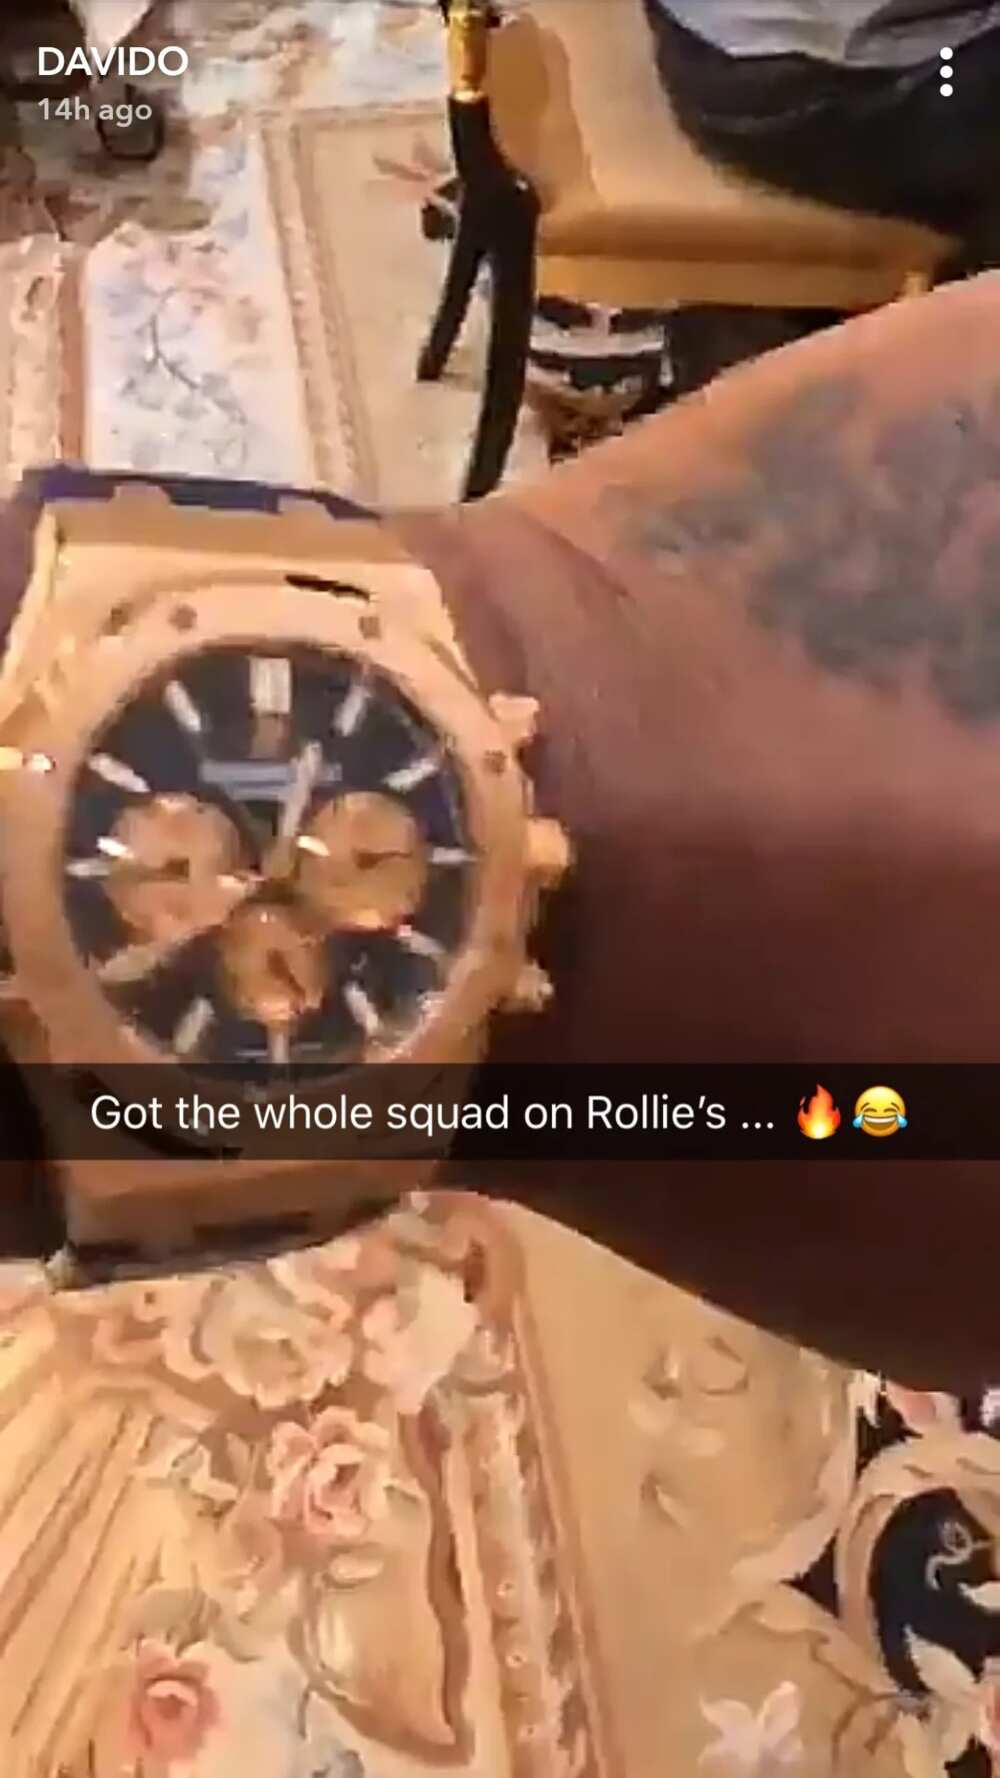 Davido thanks God for his life, buys new Rolex watches to celebrate his birthday